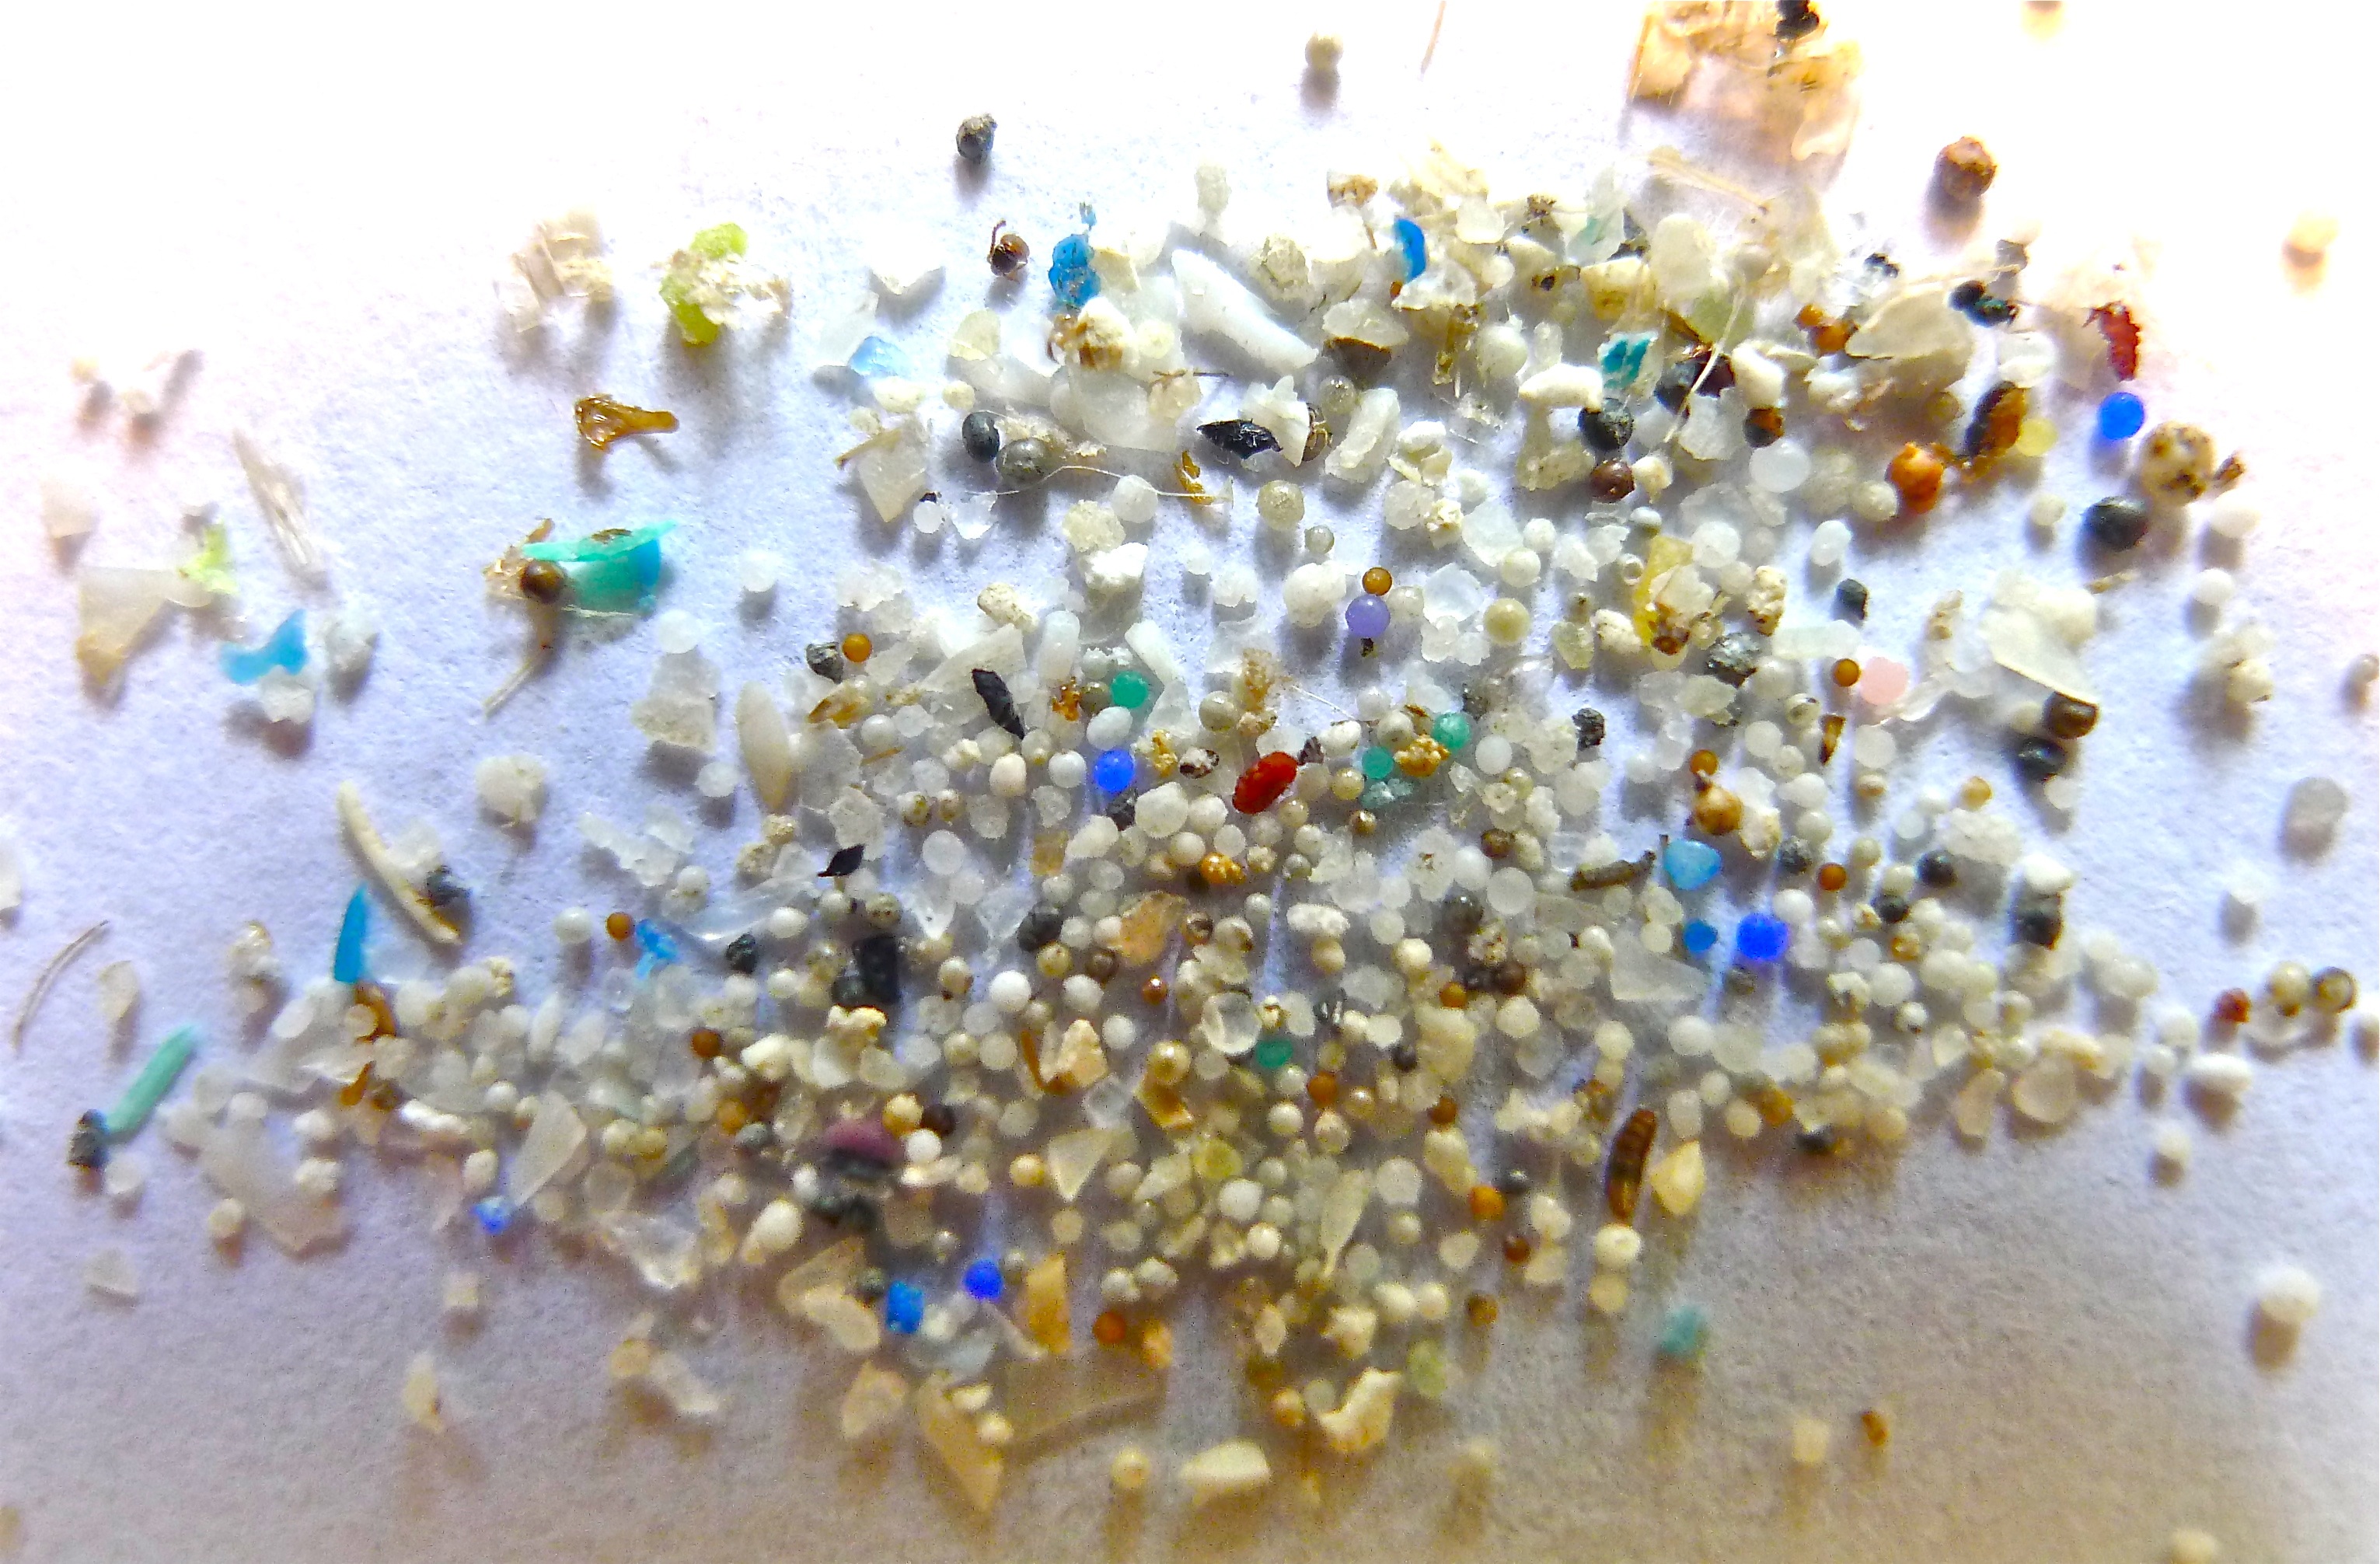 Microplastic: The Invisible Threat #WED2018